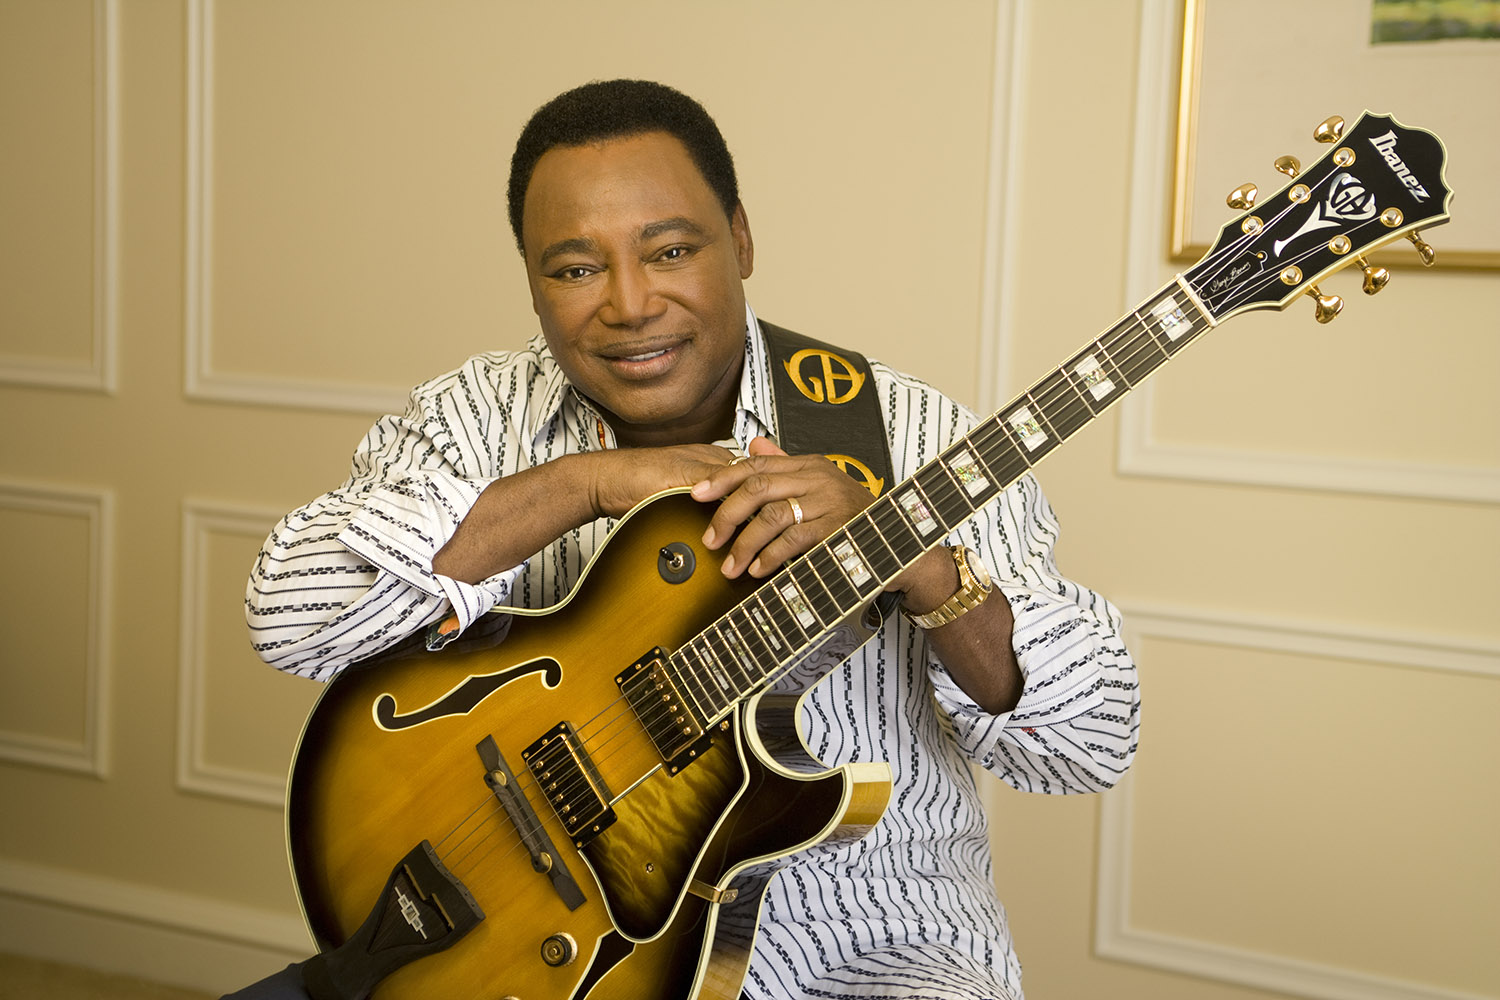 The 79-year old son of father (?) and mother(?) George Benson in 2022 photo. George Benson earned a  million dollar salary - leaving the net worth at  million in 2022